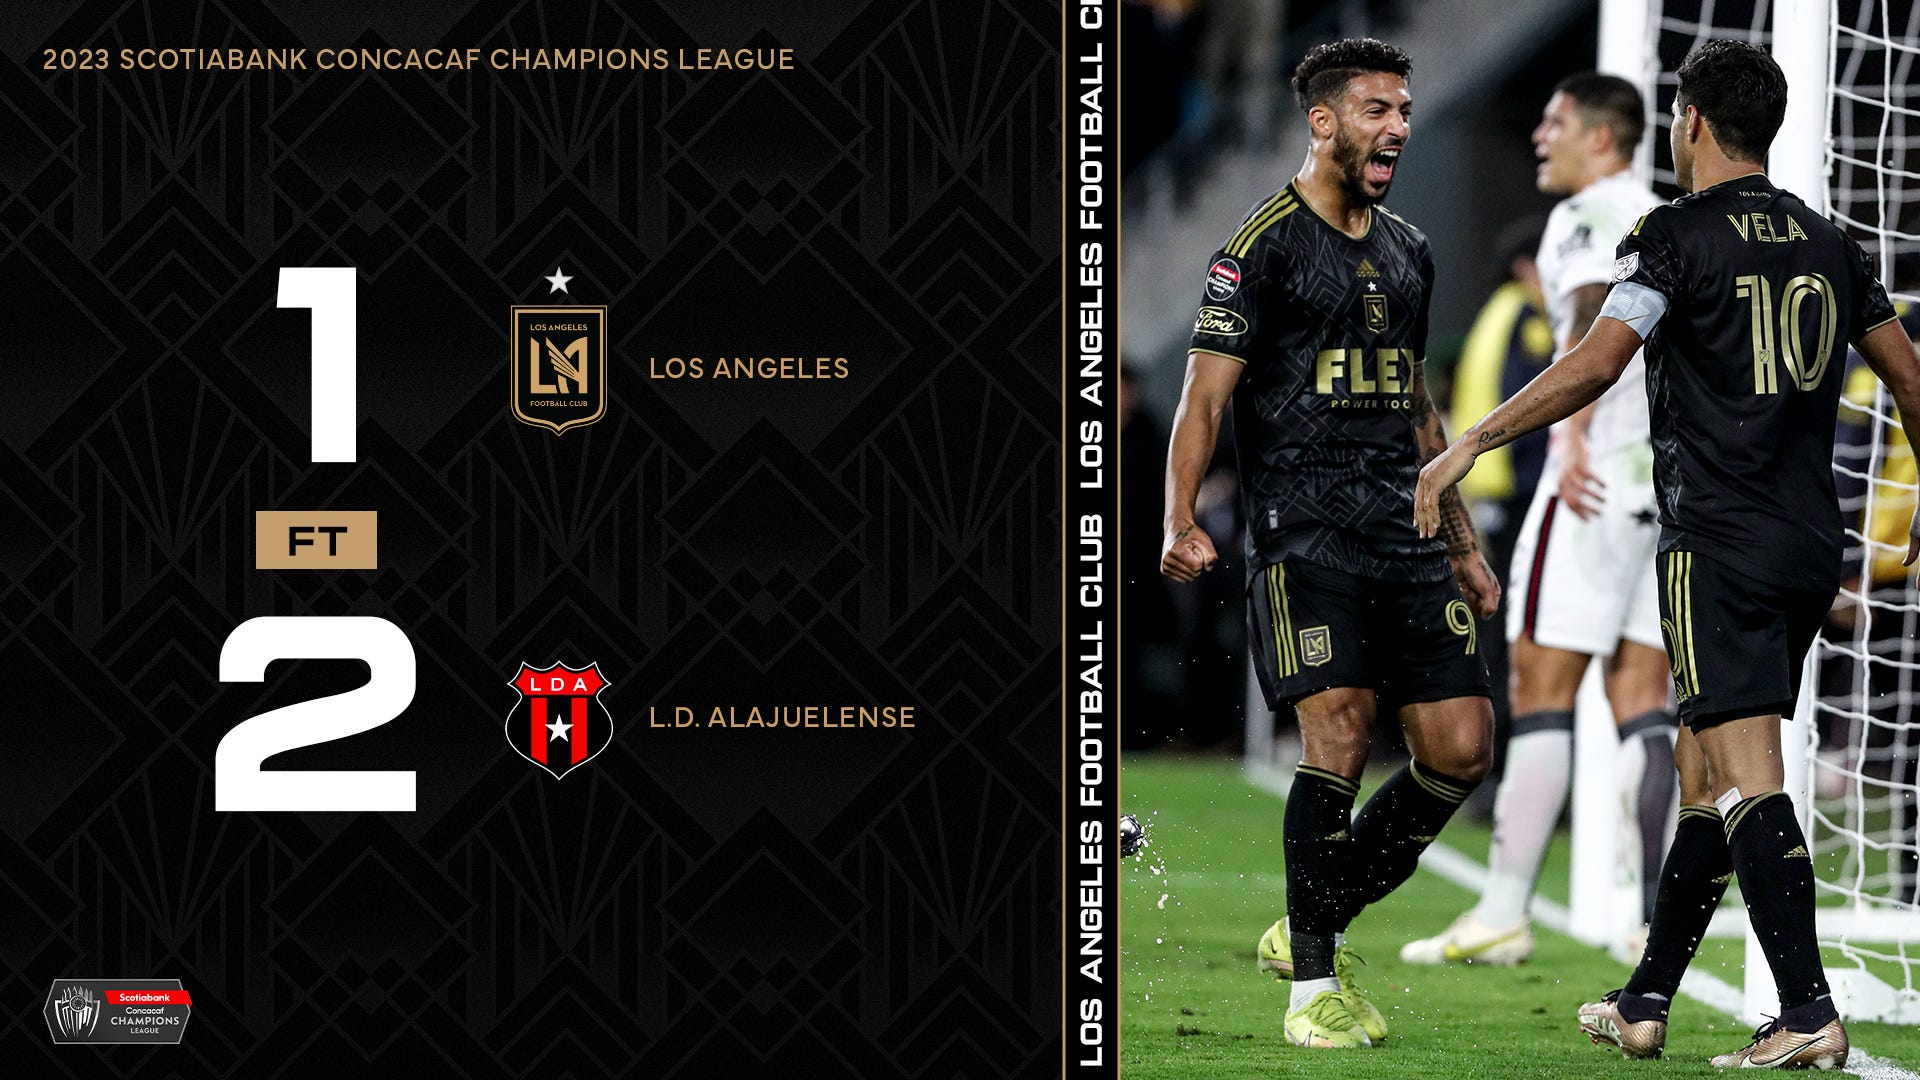 What does Carlos Vela's LAFC need to do to reach the 2023 CONCACAF  Champions League semifinals?